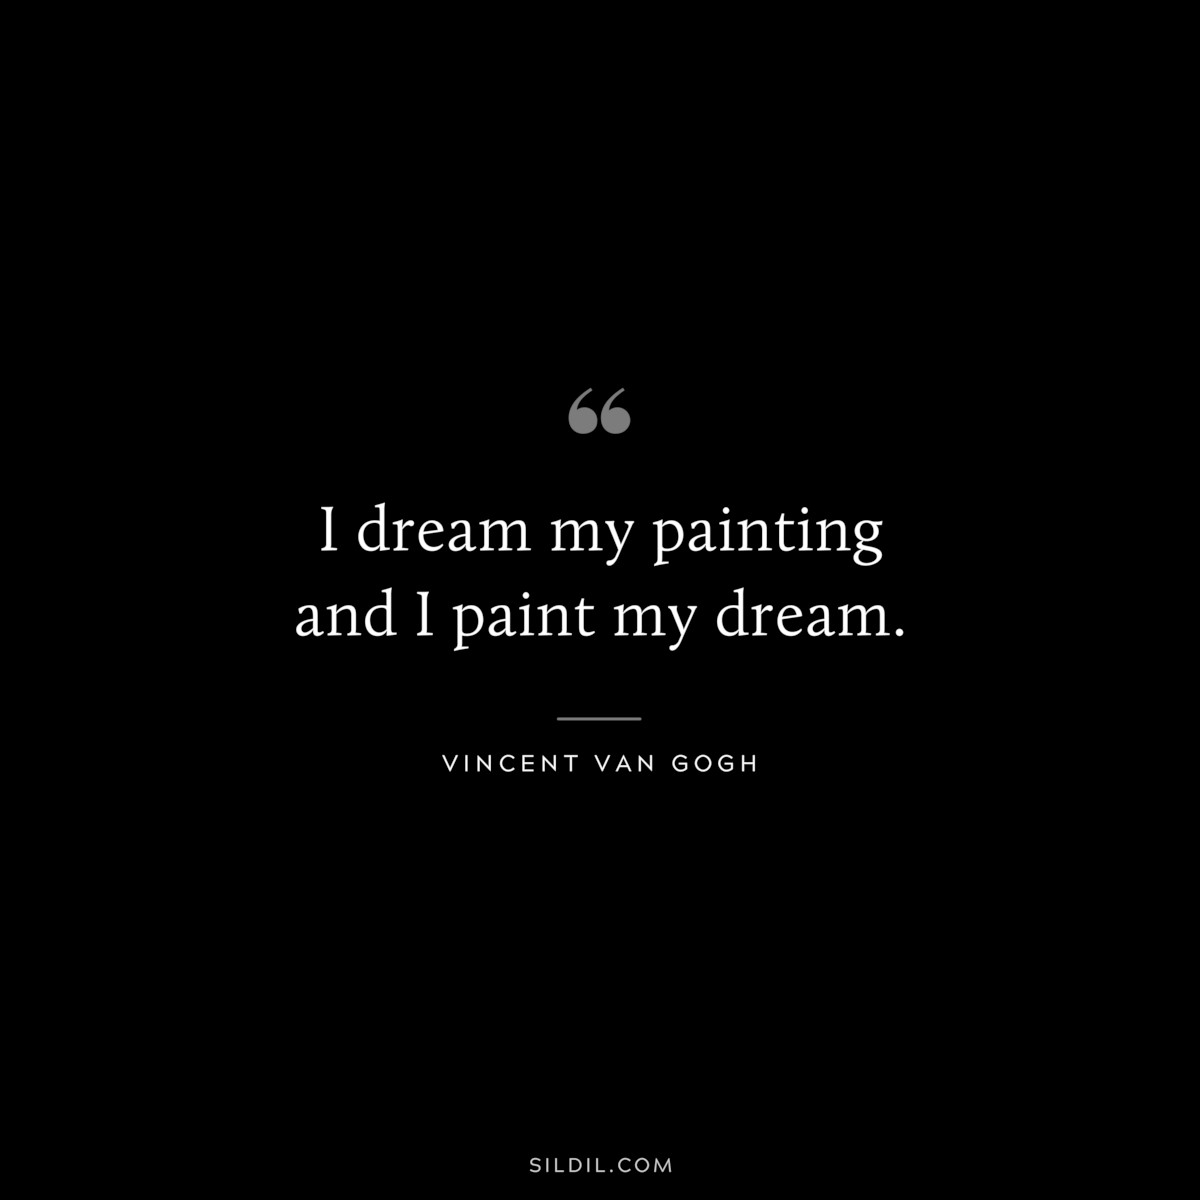 I dream my painting and I paint my dream. ― Vincent van Gogh